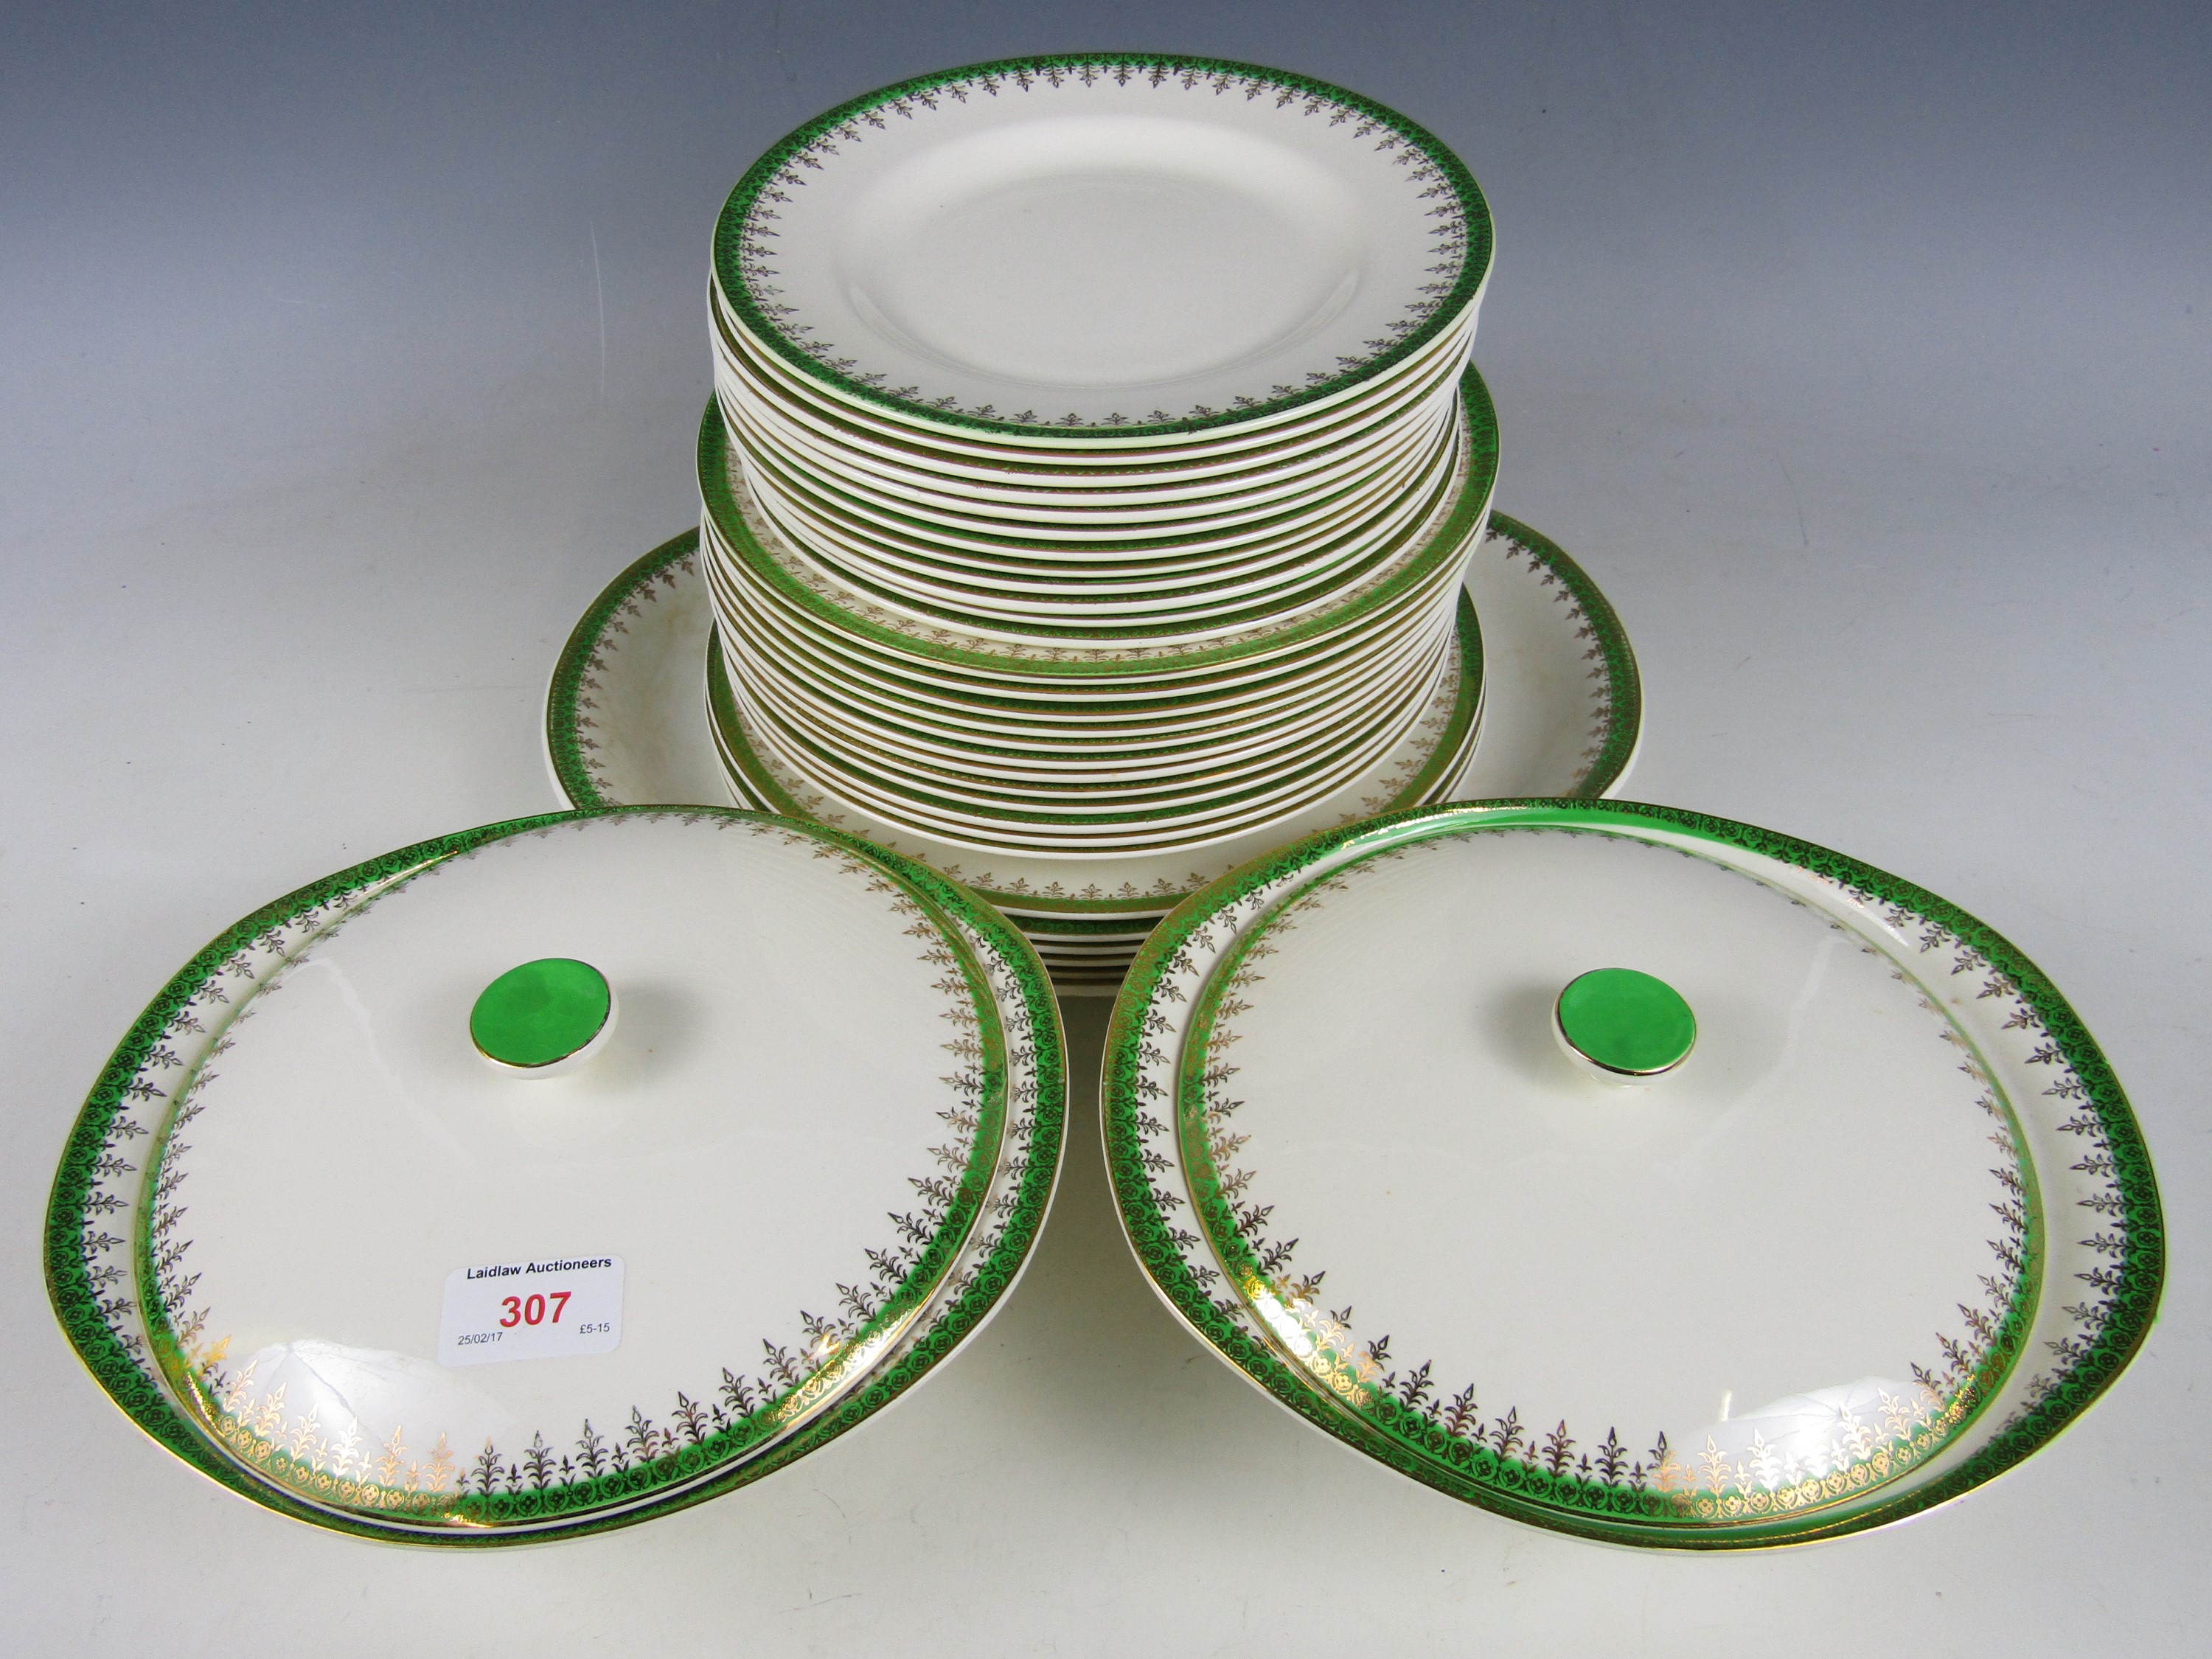 A quantity of British Anchor Pottery Co. dinnerwares